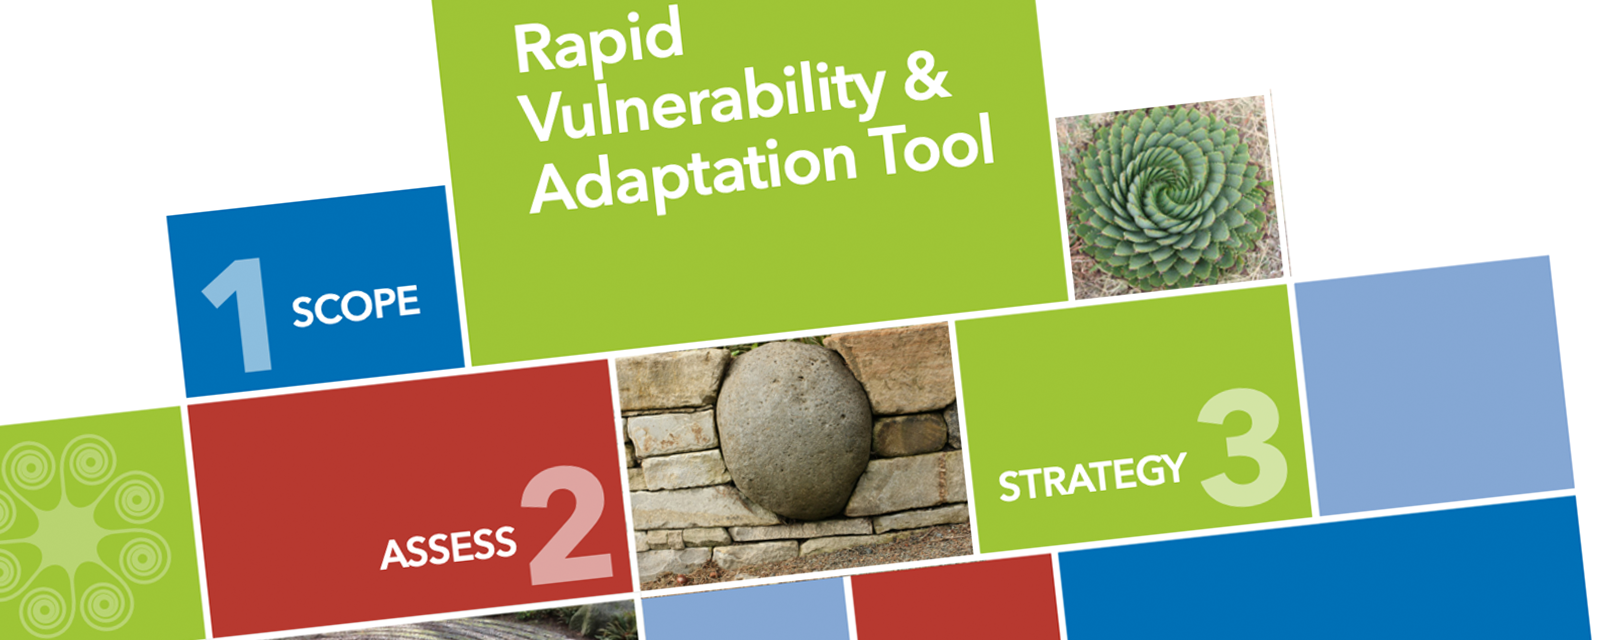 Rapid Vulnerability & Adaptation Tool for Climate-Informed Community Planning